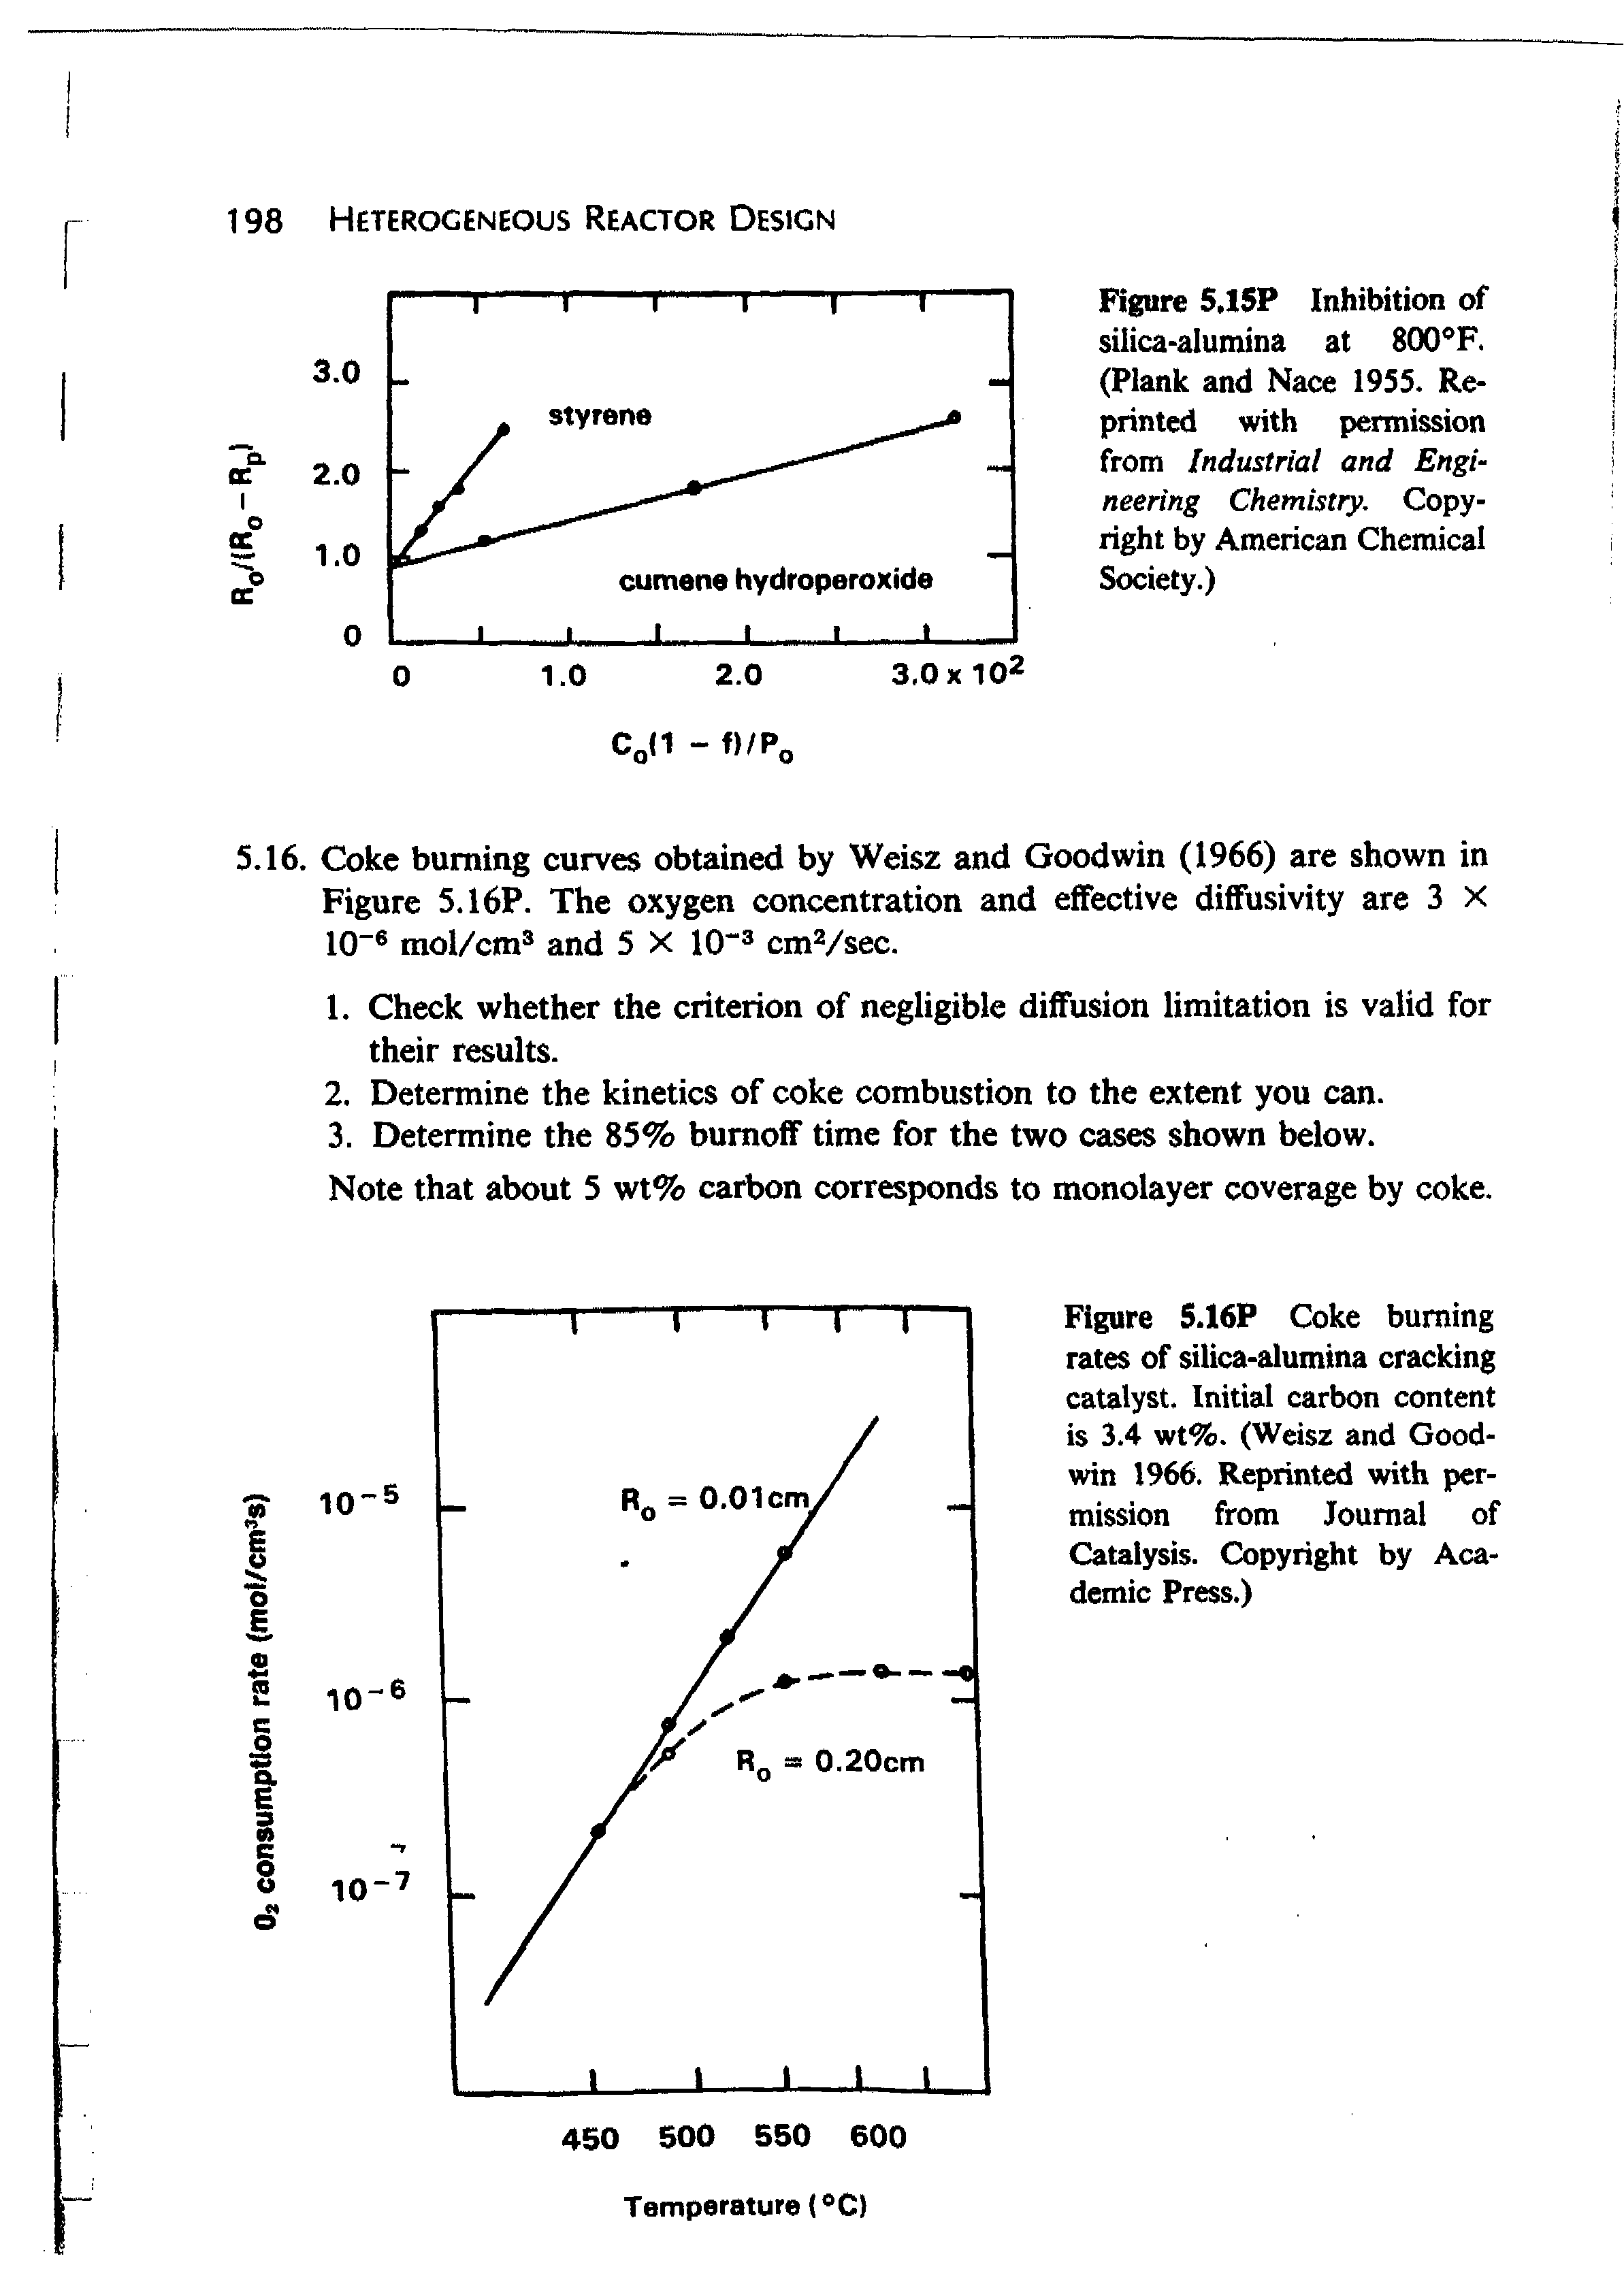 Figure 5.16P Coke burning rates of silica-alumina cracking catalyst. Initial carbon content is 3.4 wt%. (Weisz and Goodwin 1966. Reprinted with permission from Journal of Catalysis. Copyright by Academic Press.)...